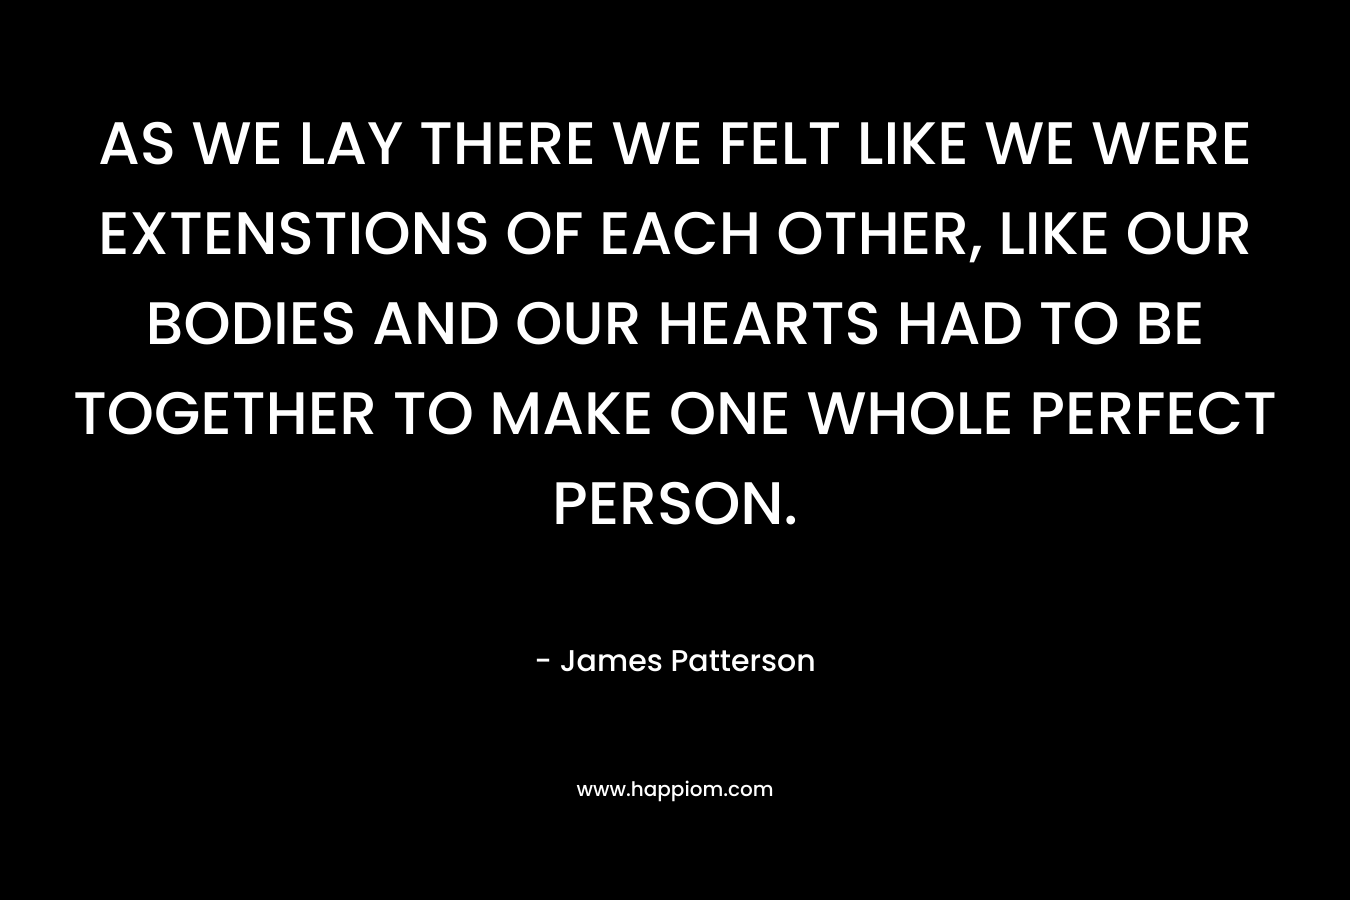 AS WE LAY THERE WE FELT LIKE WE WERE EXTENSTIONS OF EACH OTHER, LIKE OUR BODIES AND OUR HEARTS HAD TO BE TOGETHER TO MAKE ONE WHOLE PERFECT PERSON. – James Patterson